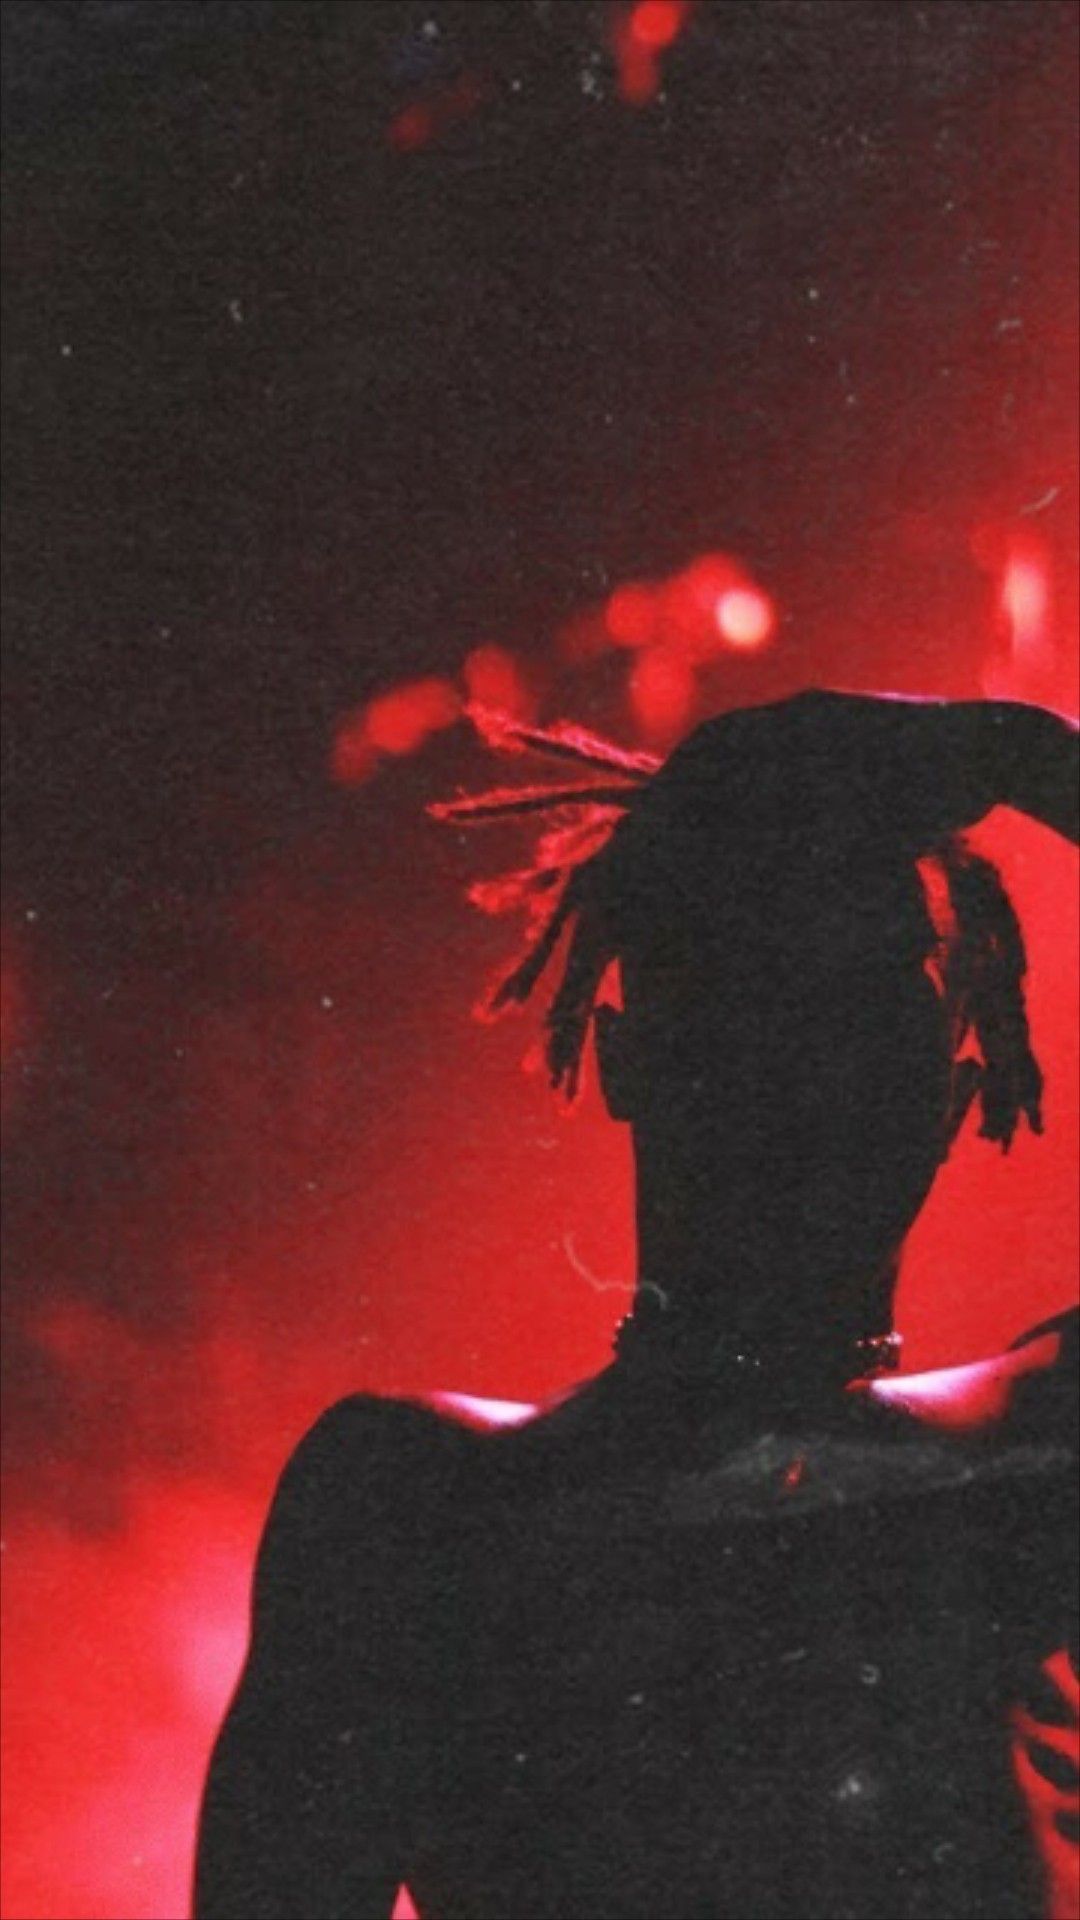 A person with long hair is standing in front of red lights - XXXTentacion